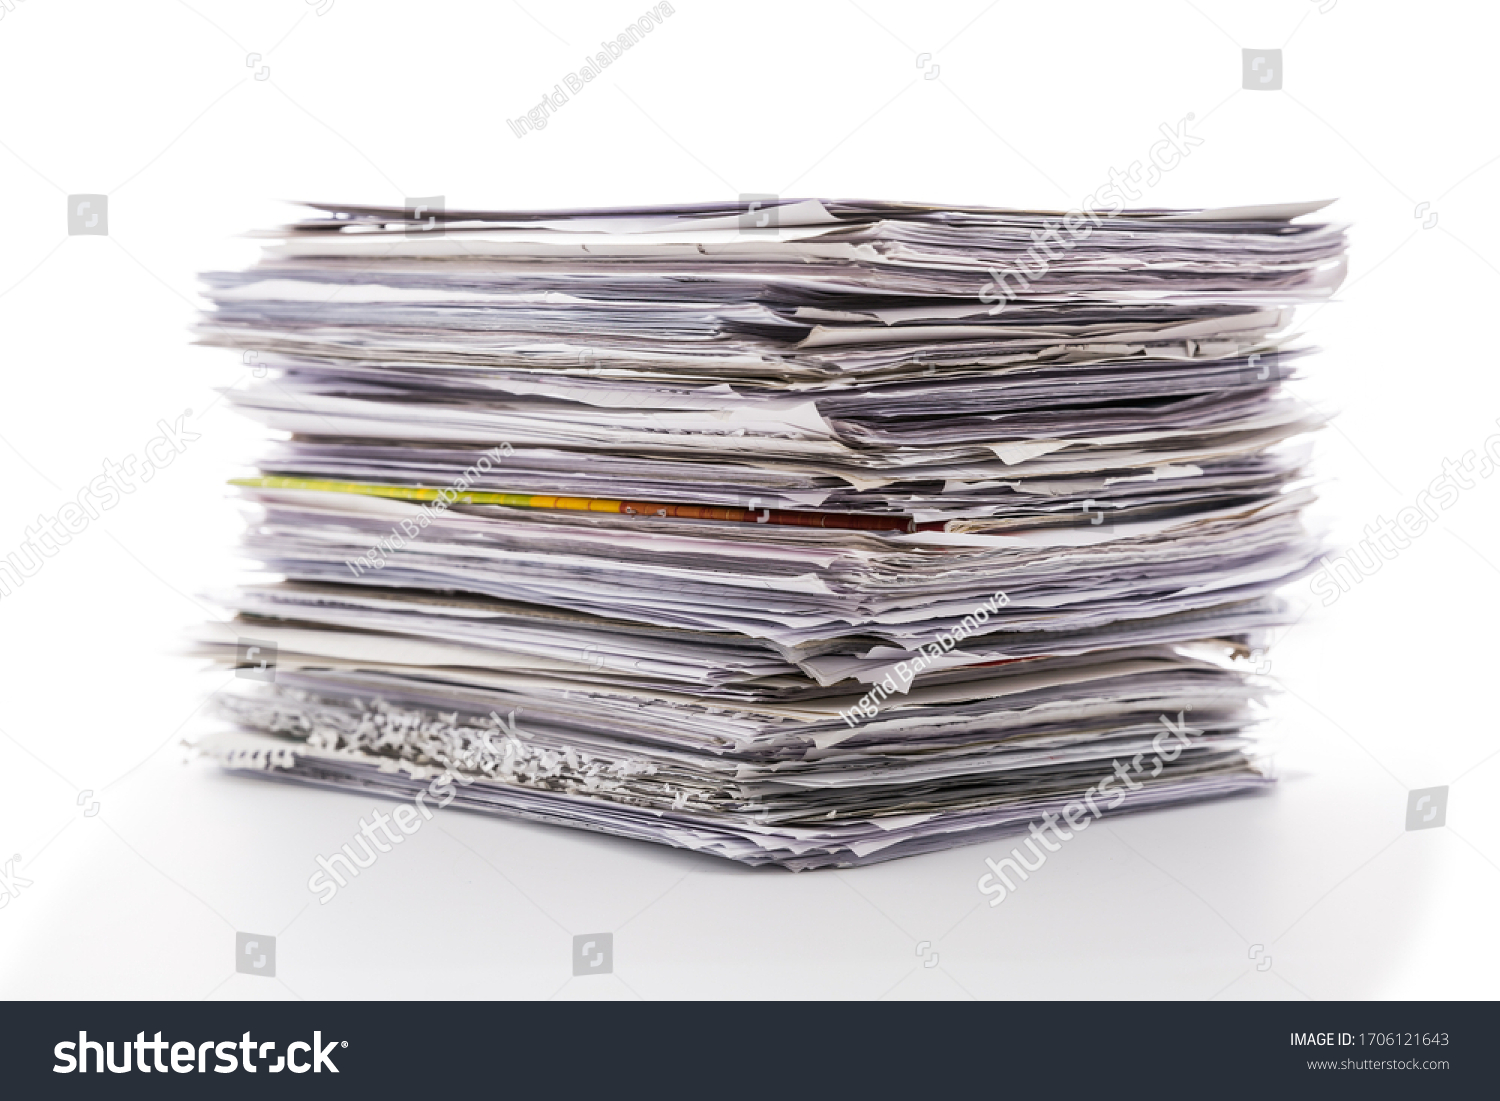 Large pile of waste paper isolated on white. Ready for recycling #1706121643